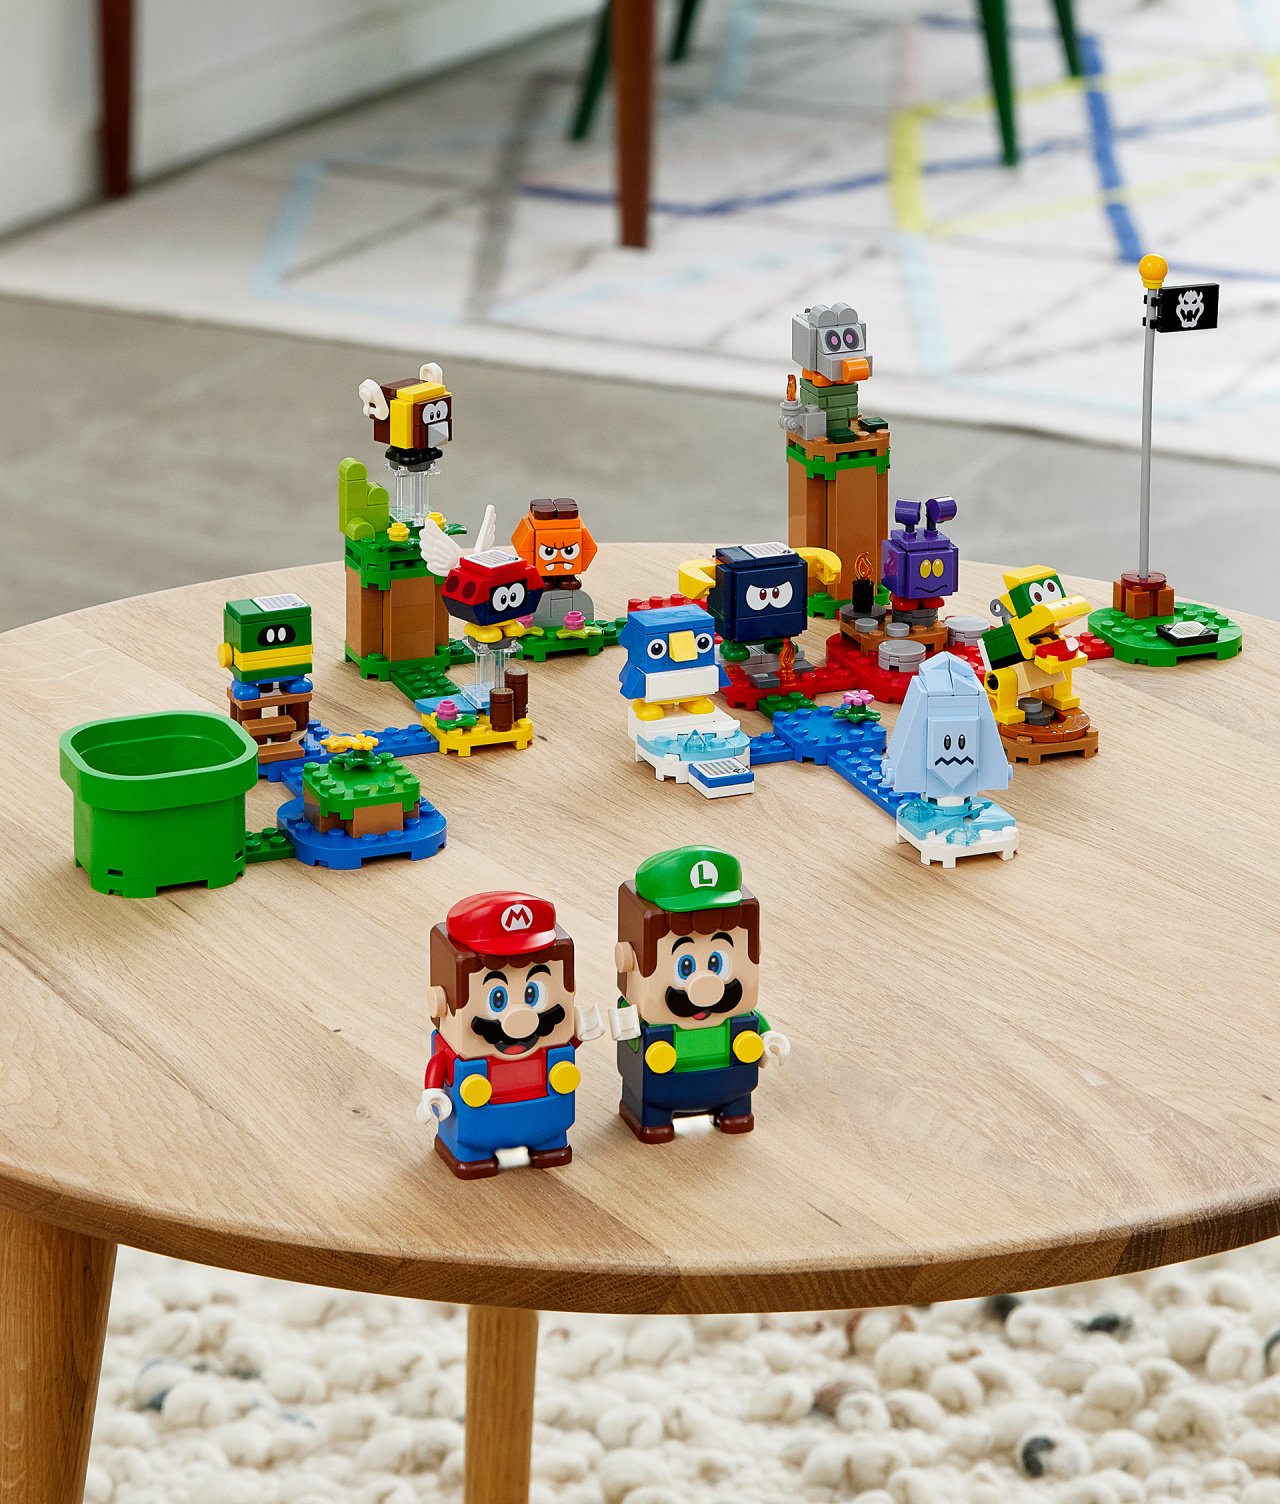 How Lego's Mario sets bring the magic of Nintendo to life - The Verge